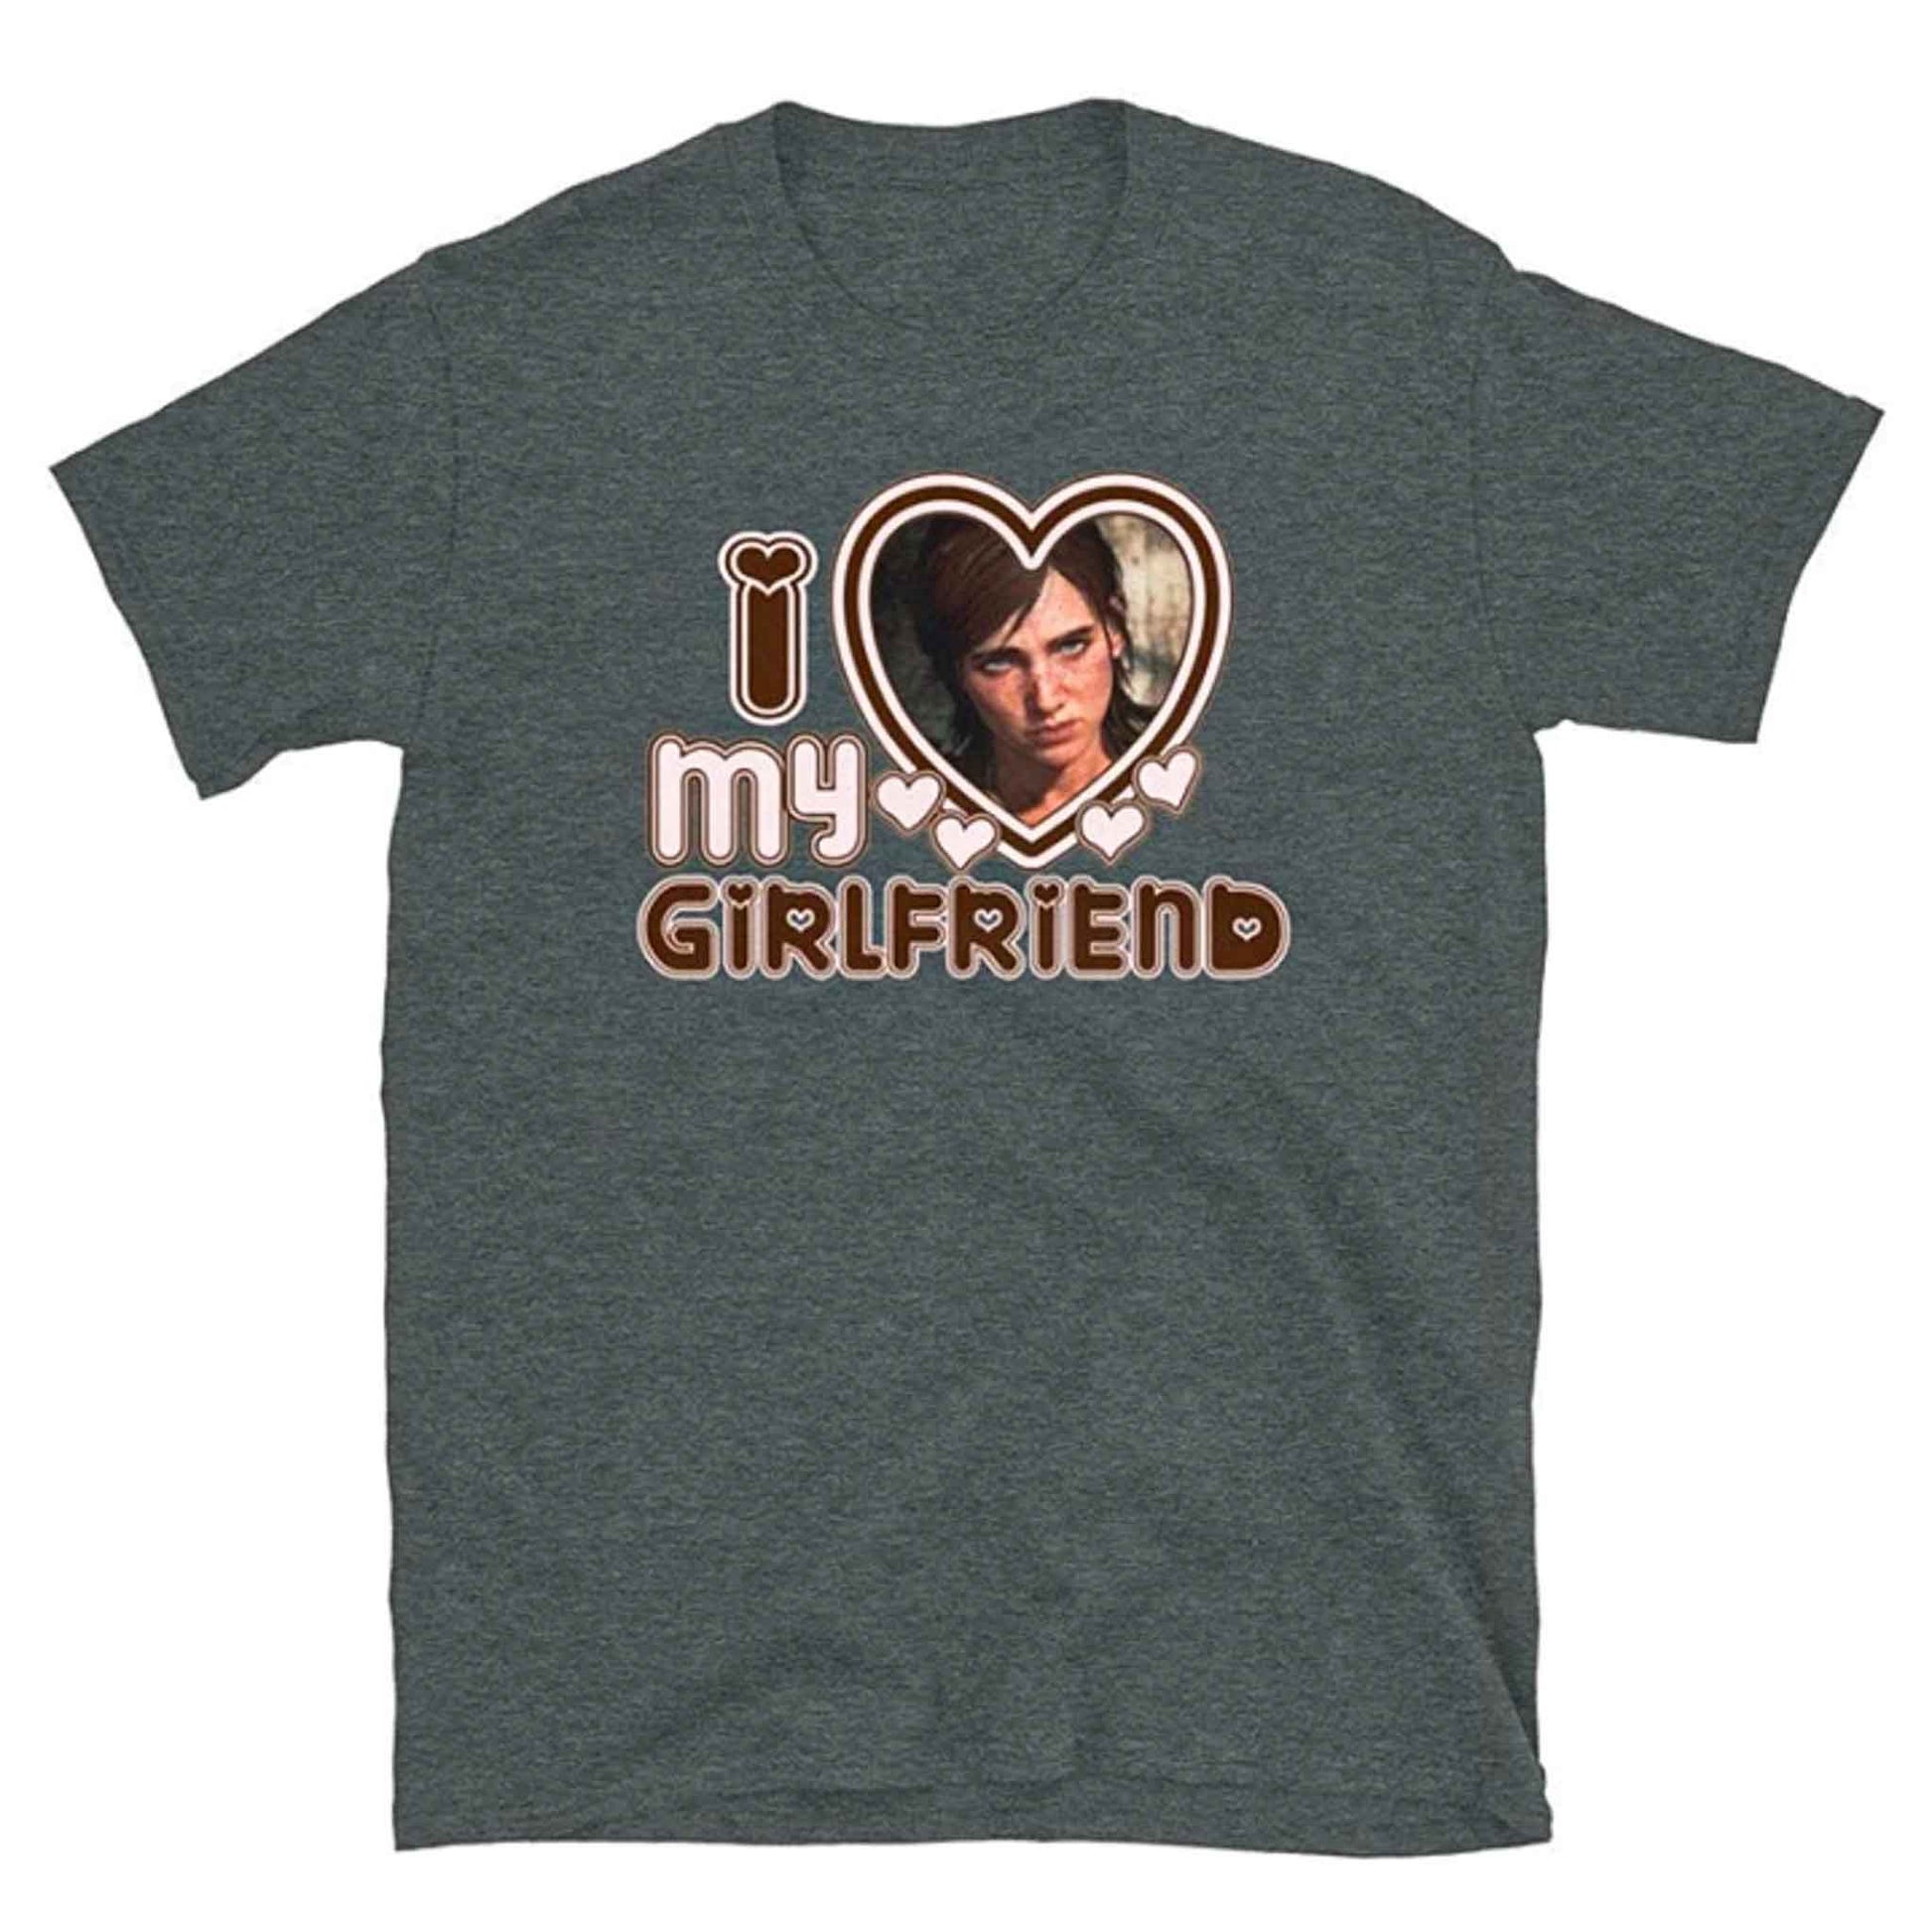 I Love My Girlfriend Ellie Williams Tshirt - Dark Grey / XL Available at 2Fast2See.co